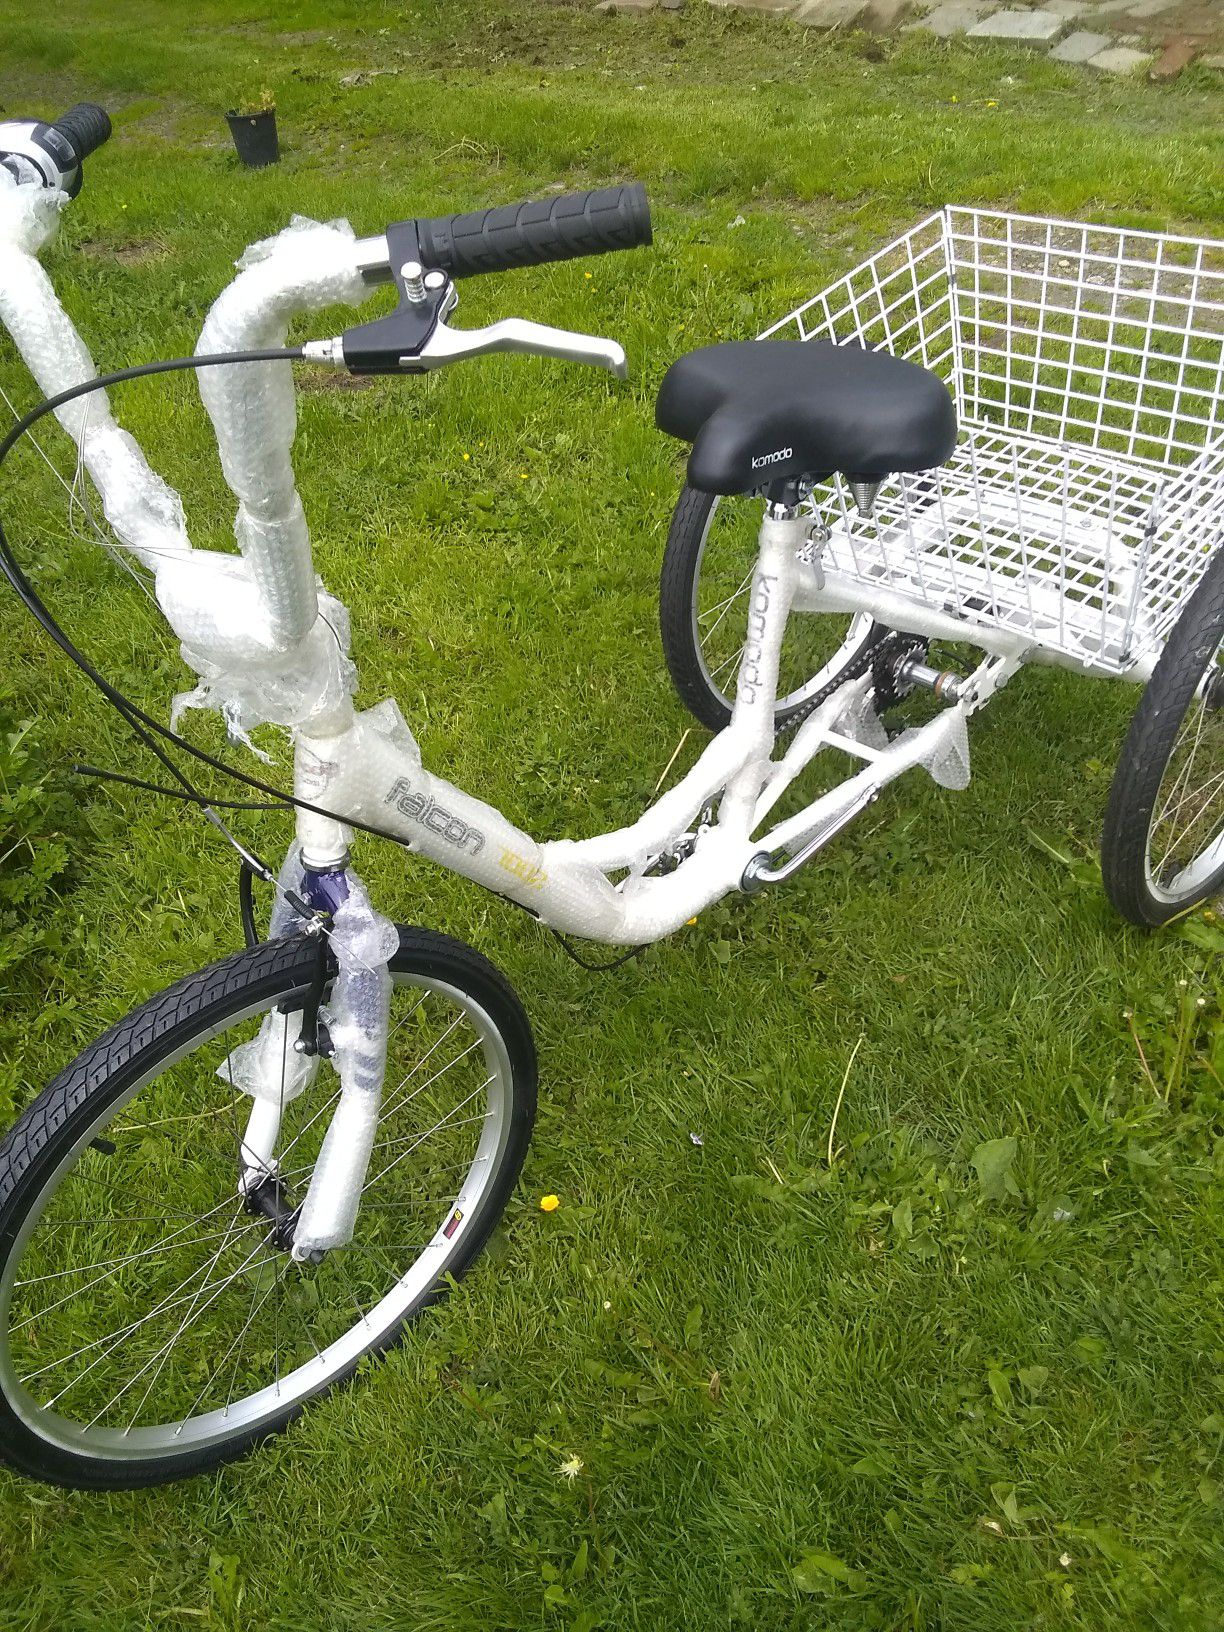 Brand new Komodo adult tricycle with 6 speeds